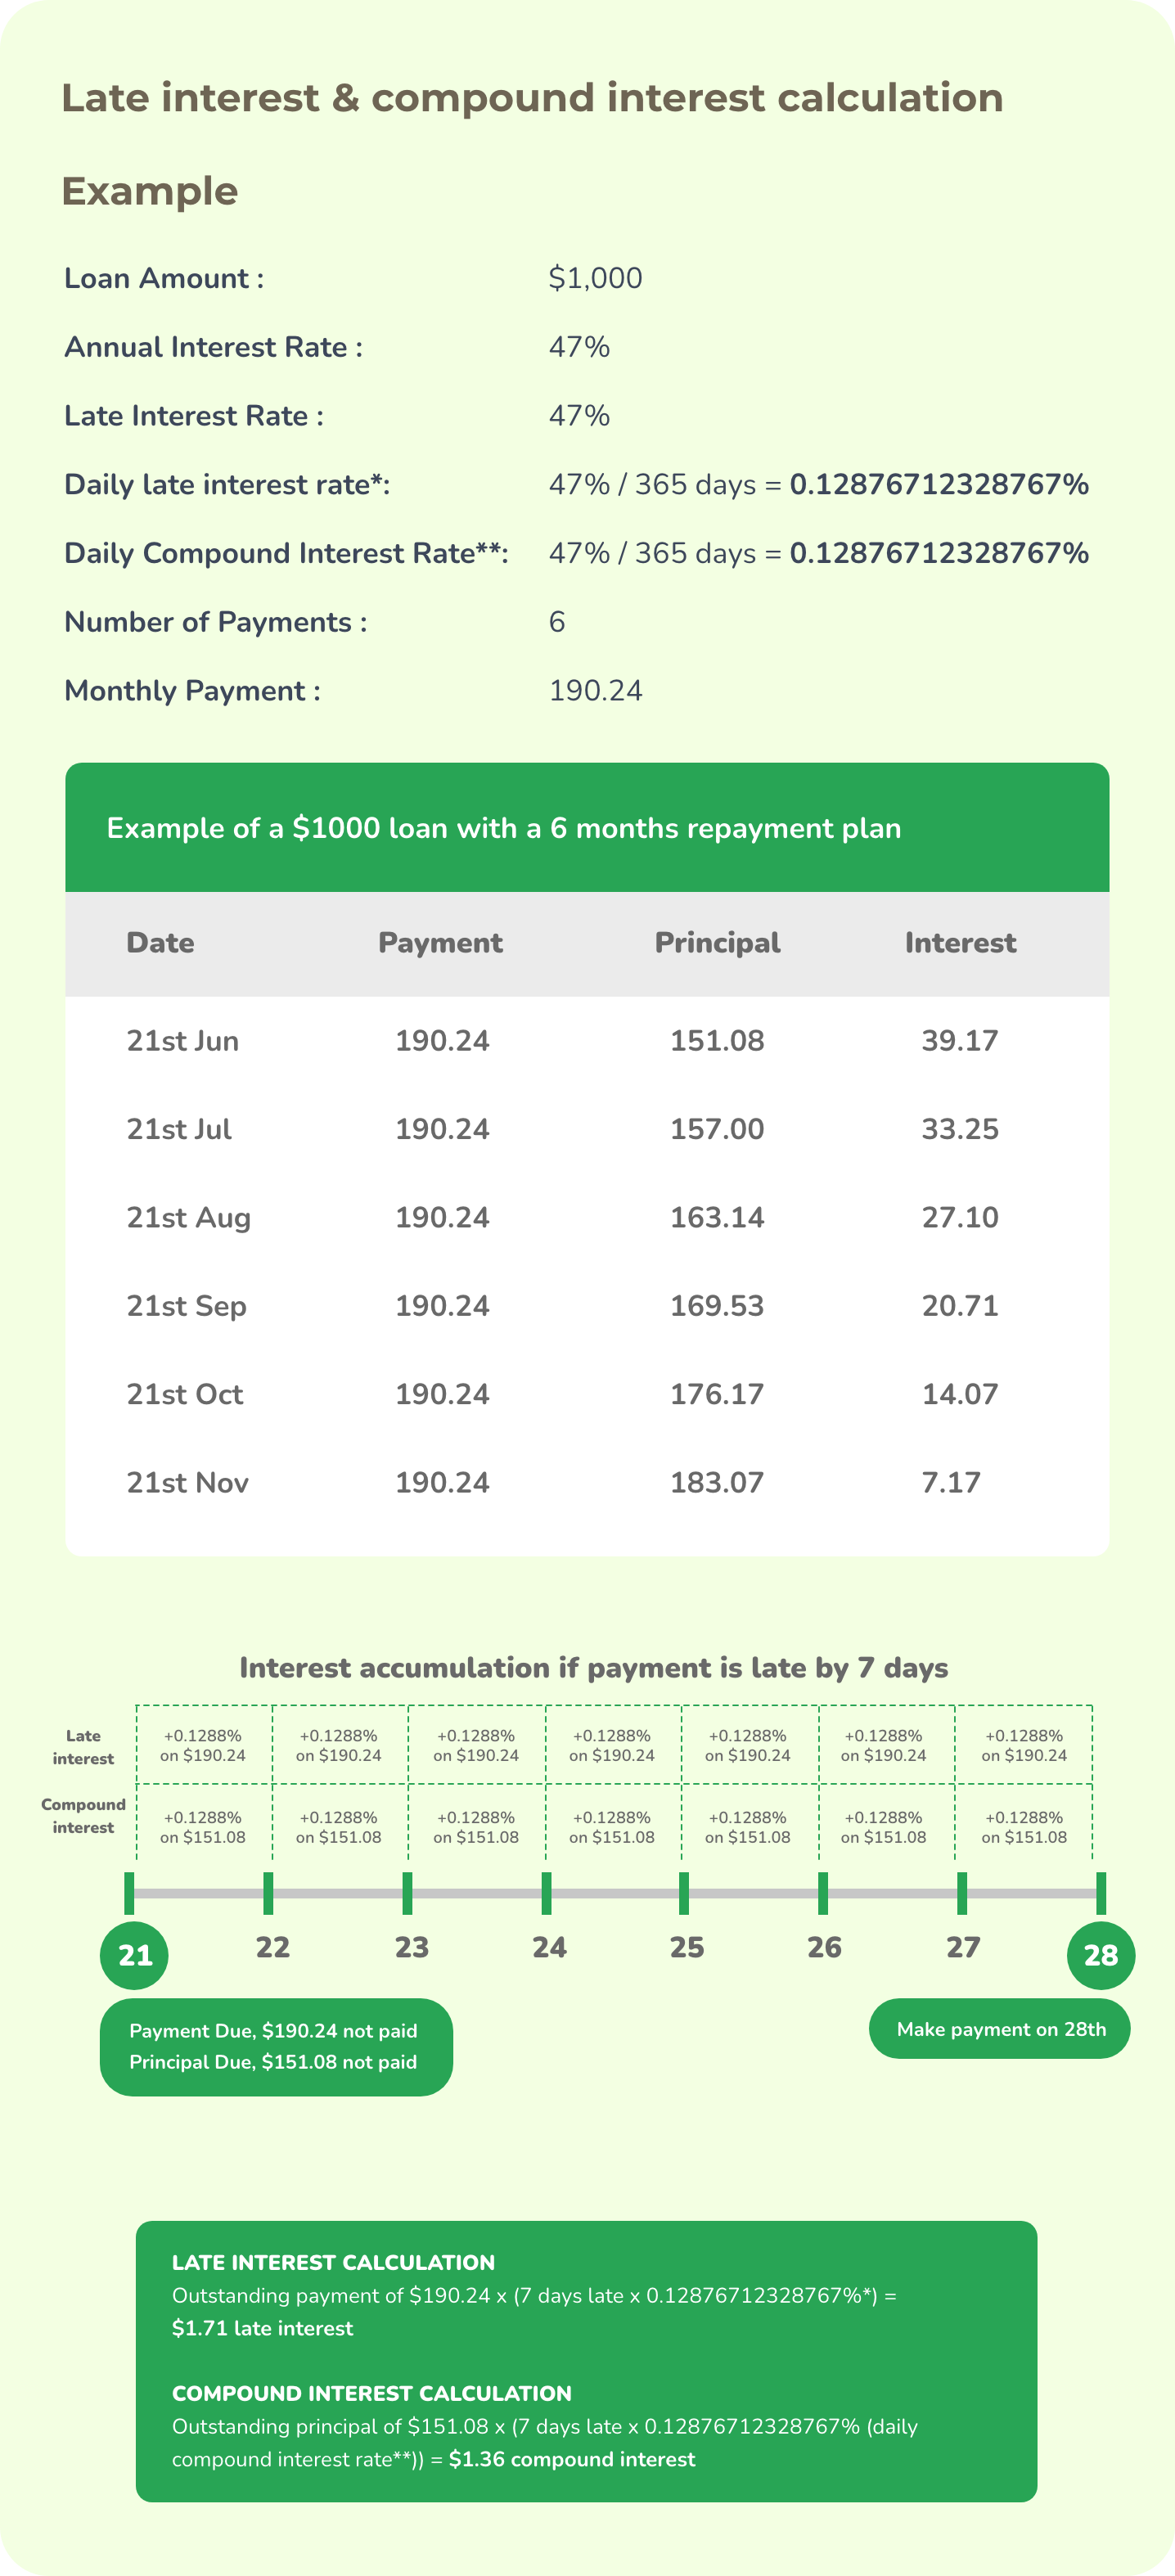 An infographic of how late interest and compound interest are calculated after borrowing from a licensed money lender